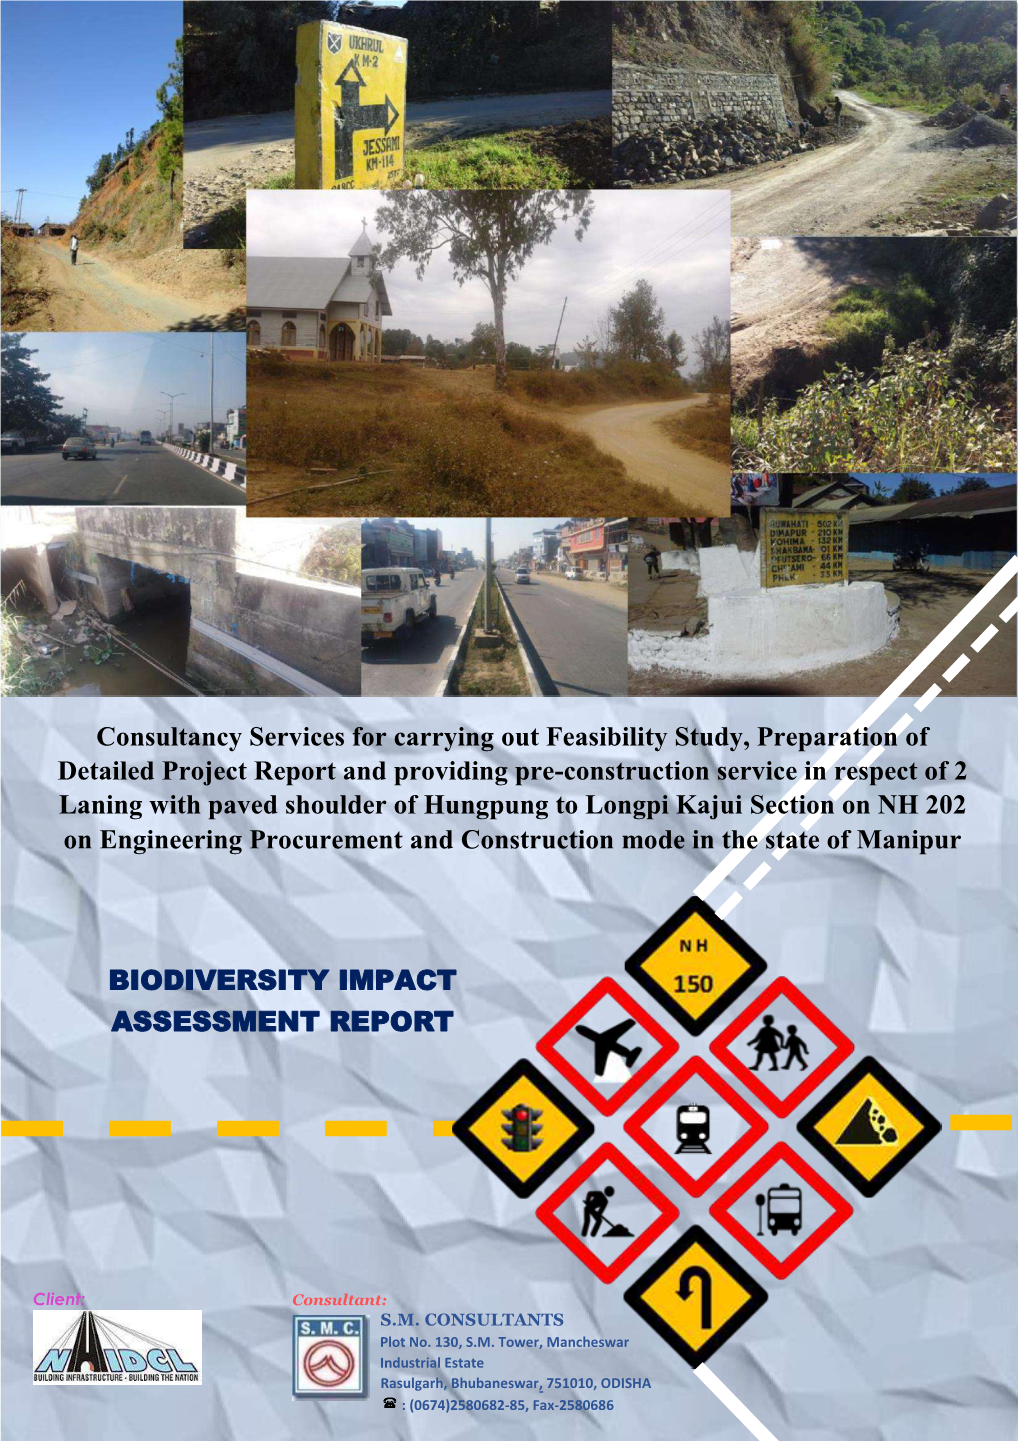 BIODIVERSITY IMPACT ASSESSMENT REPORT Consultancy Services for Carrying out Feasibility Study, Preparation of Detailed Project R